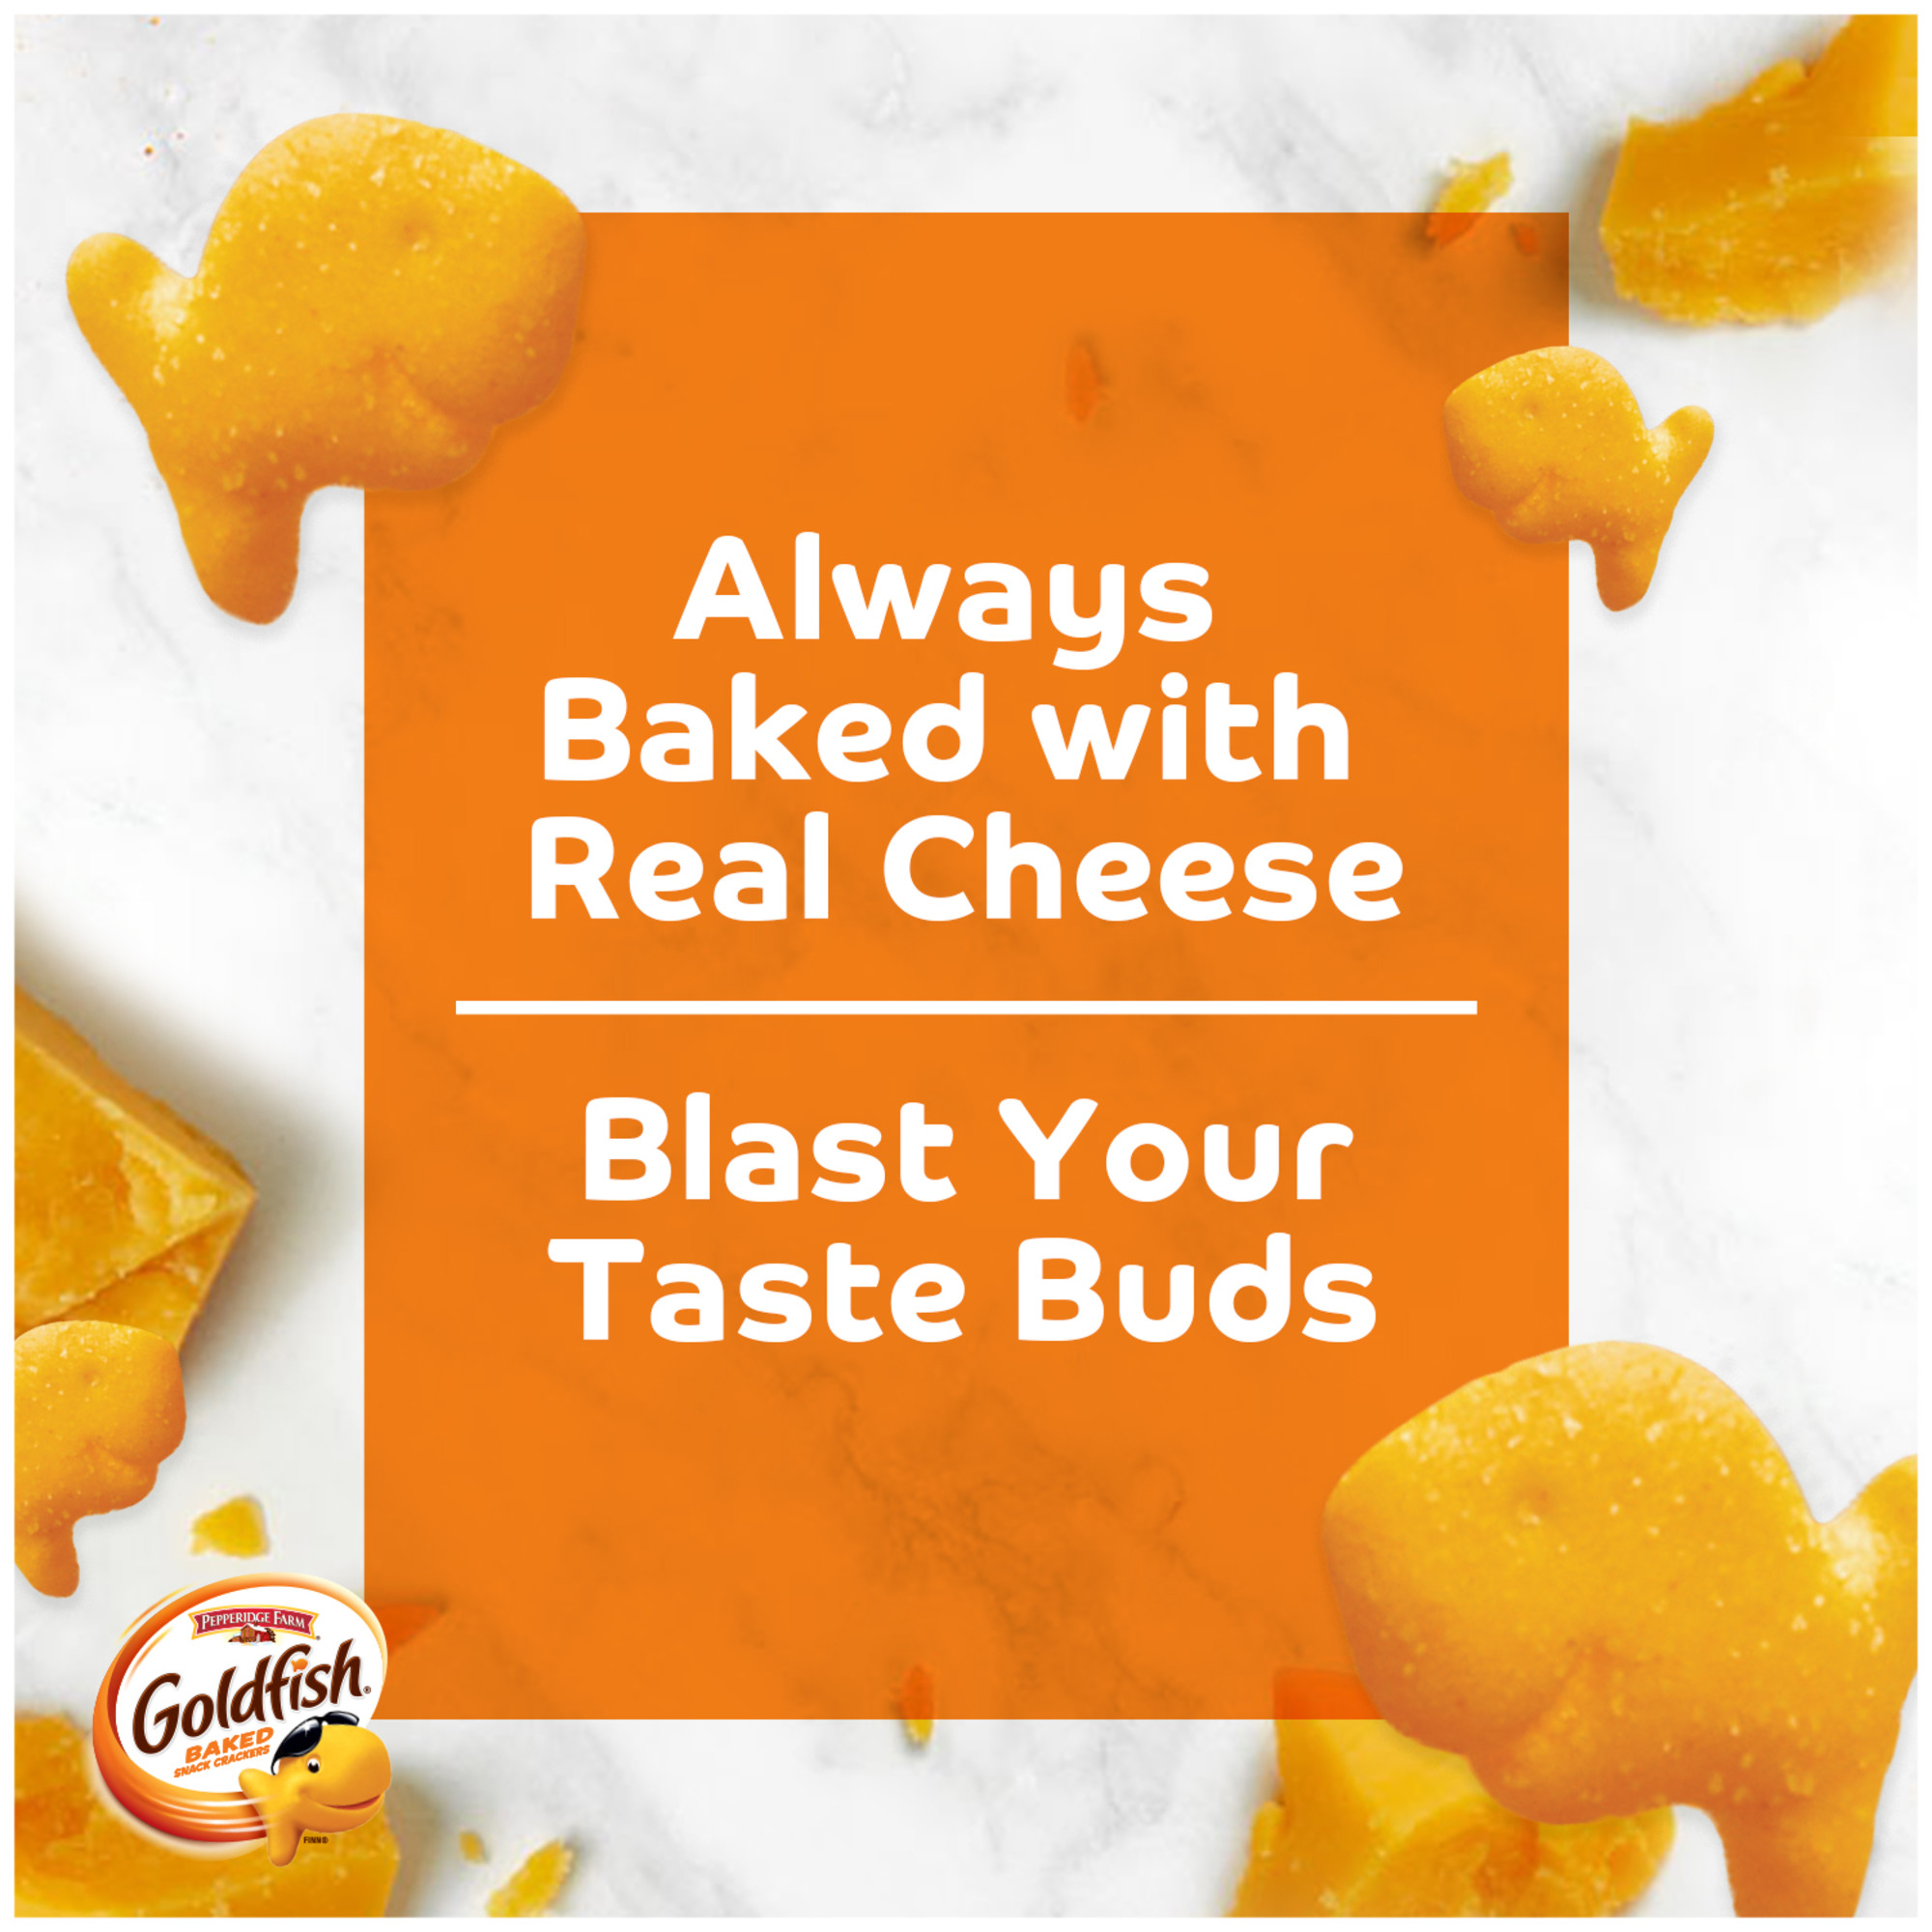 Goldfish Flavor Blasted Xtra Cheddar Snack Crackers, 10 oz box - image 3 of 12